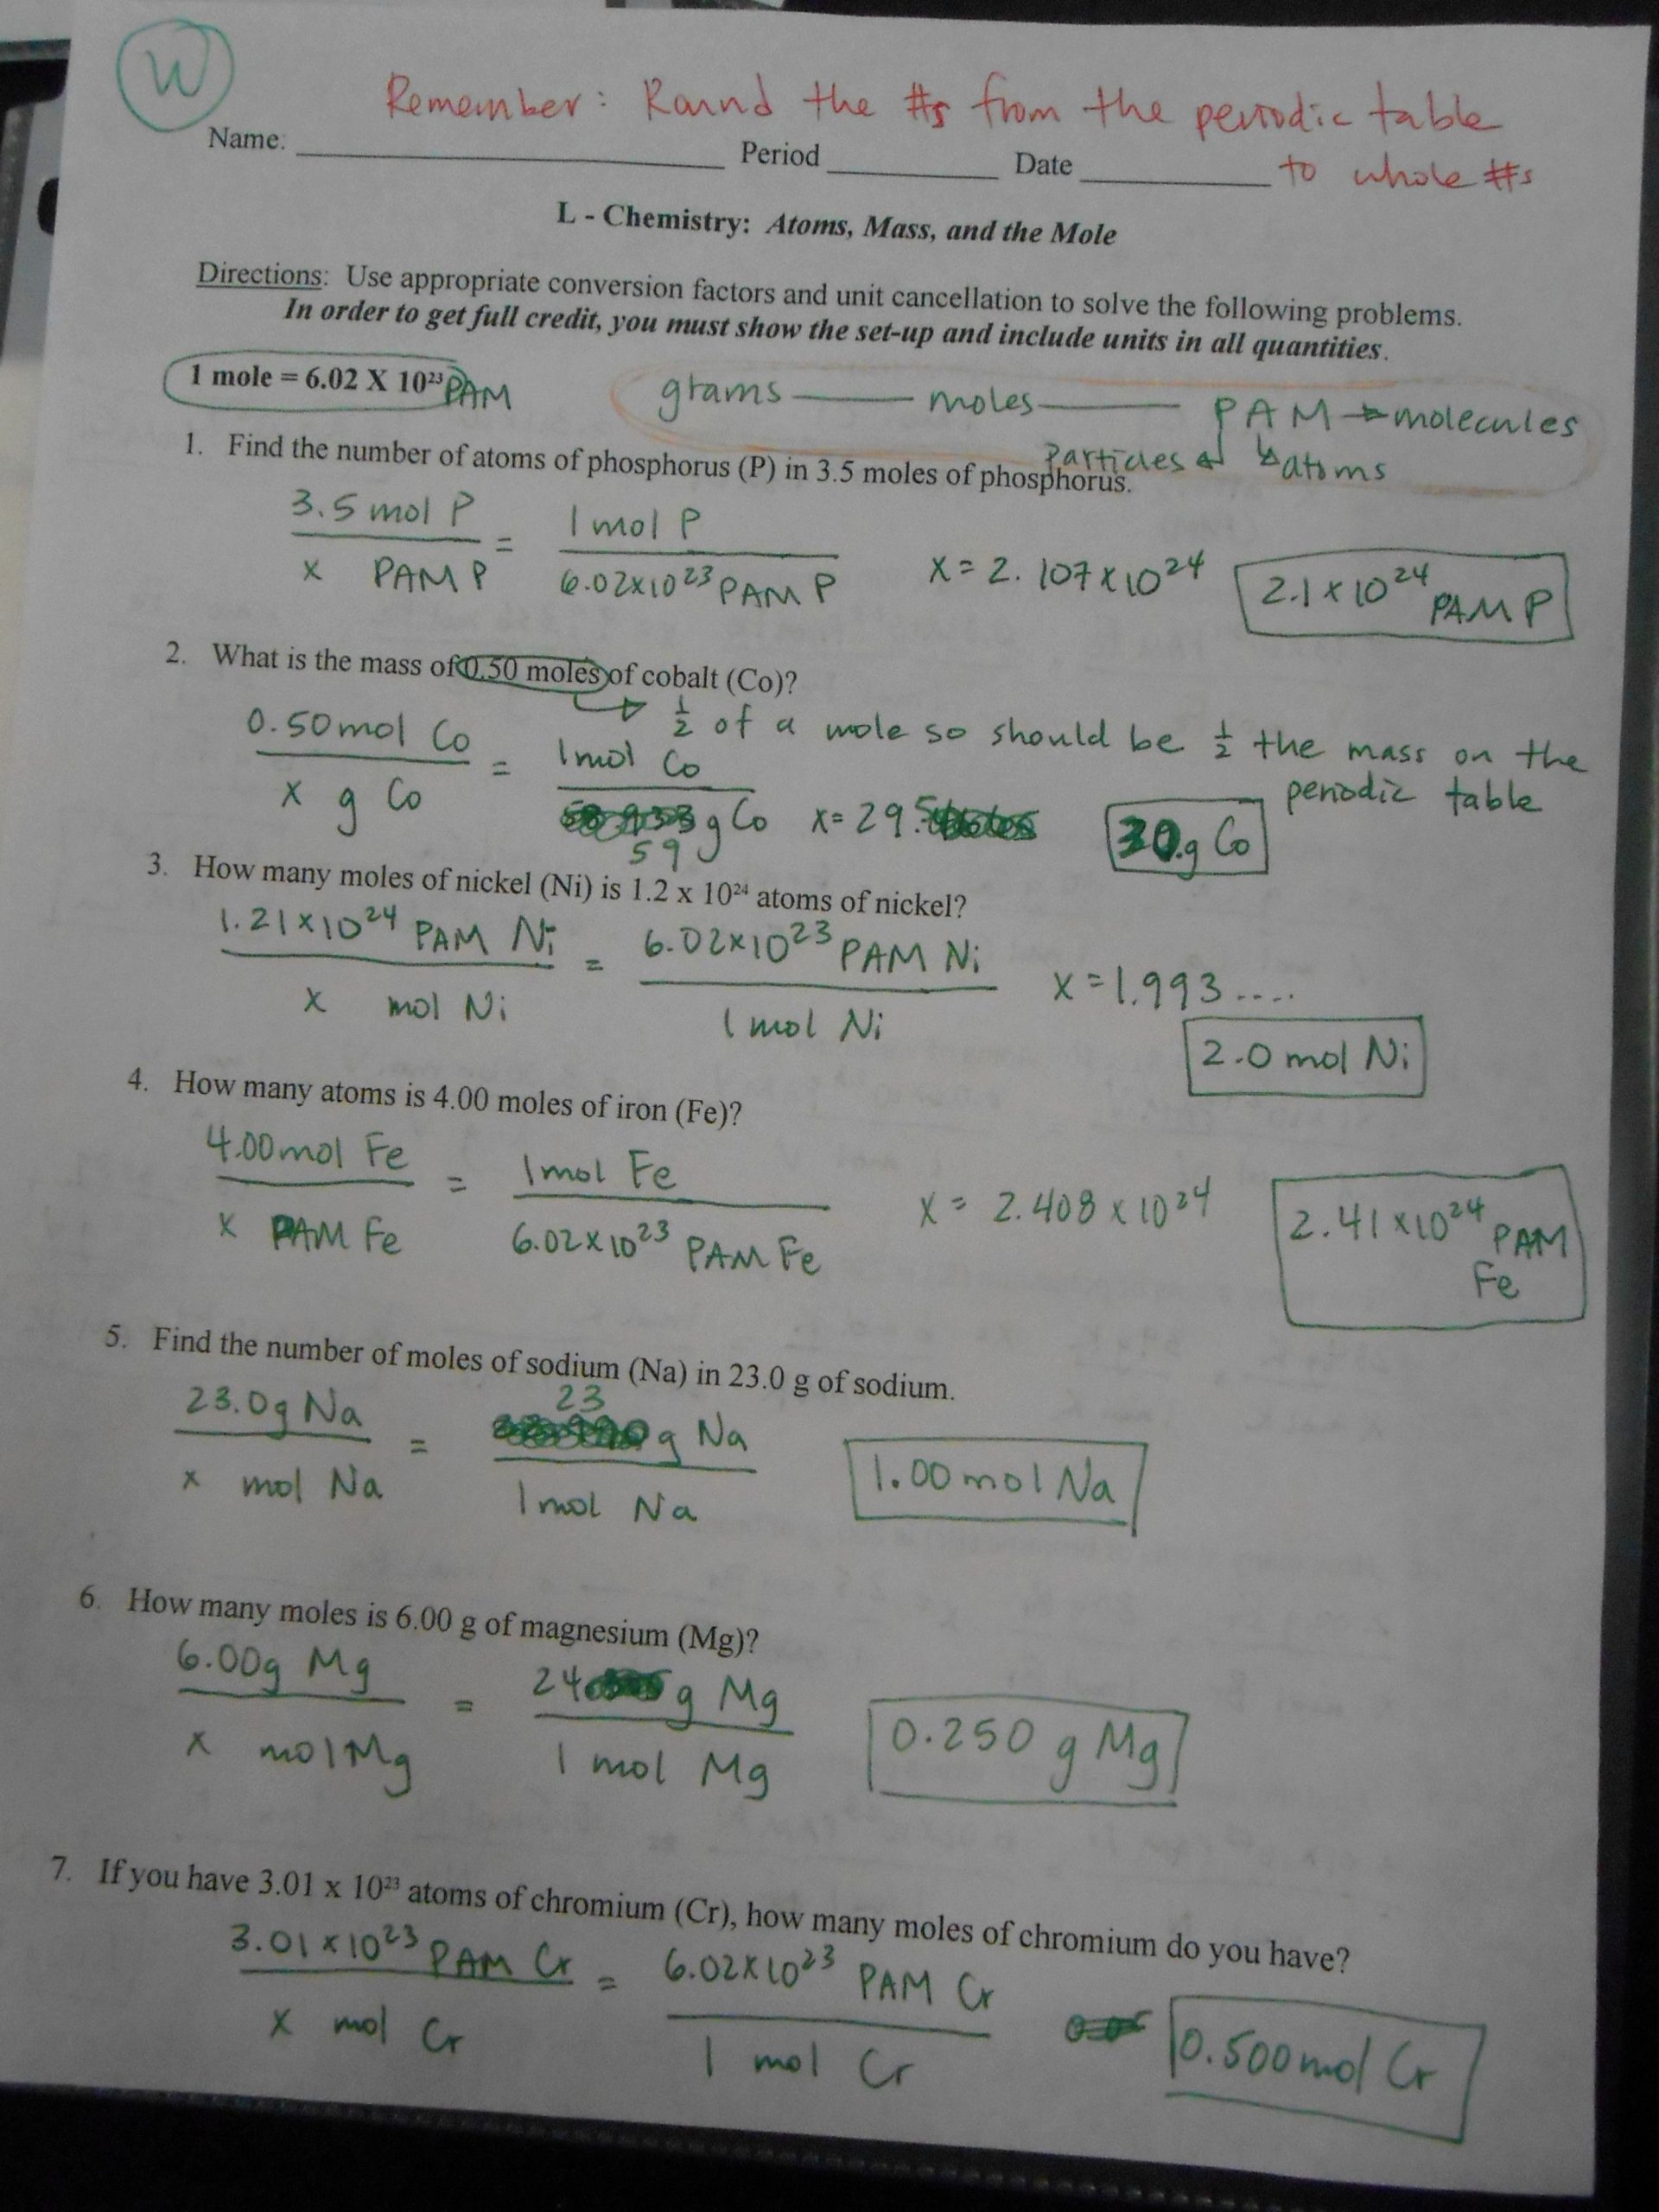 Nuclear Chemistry Worksheet K 50 Nuclear Chemistry Worksheet Answer Key In 2020